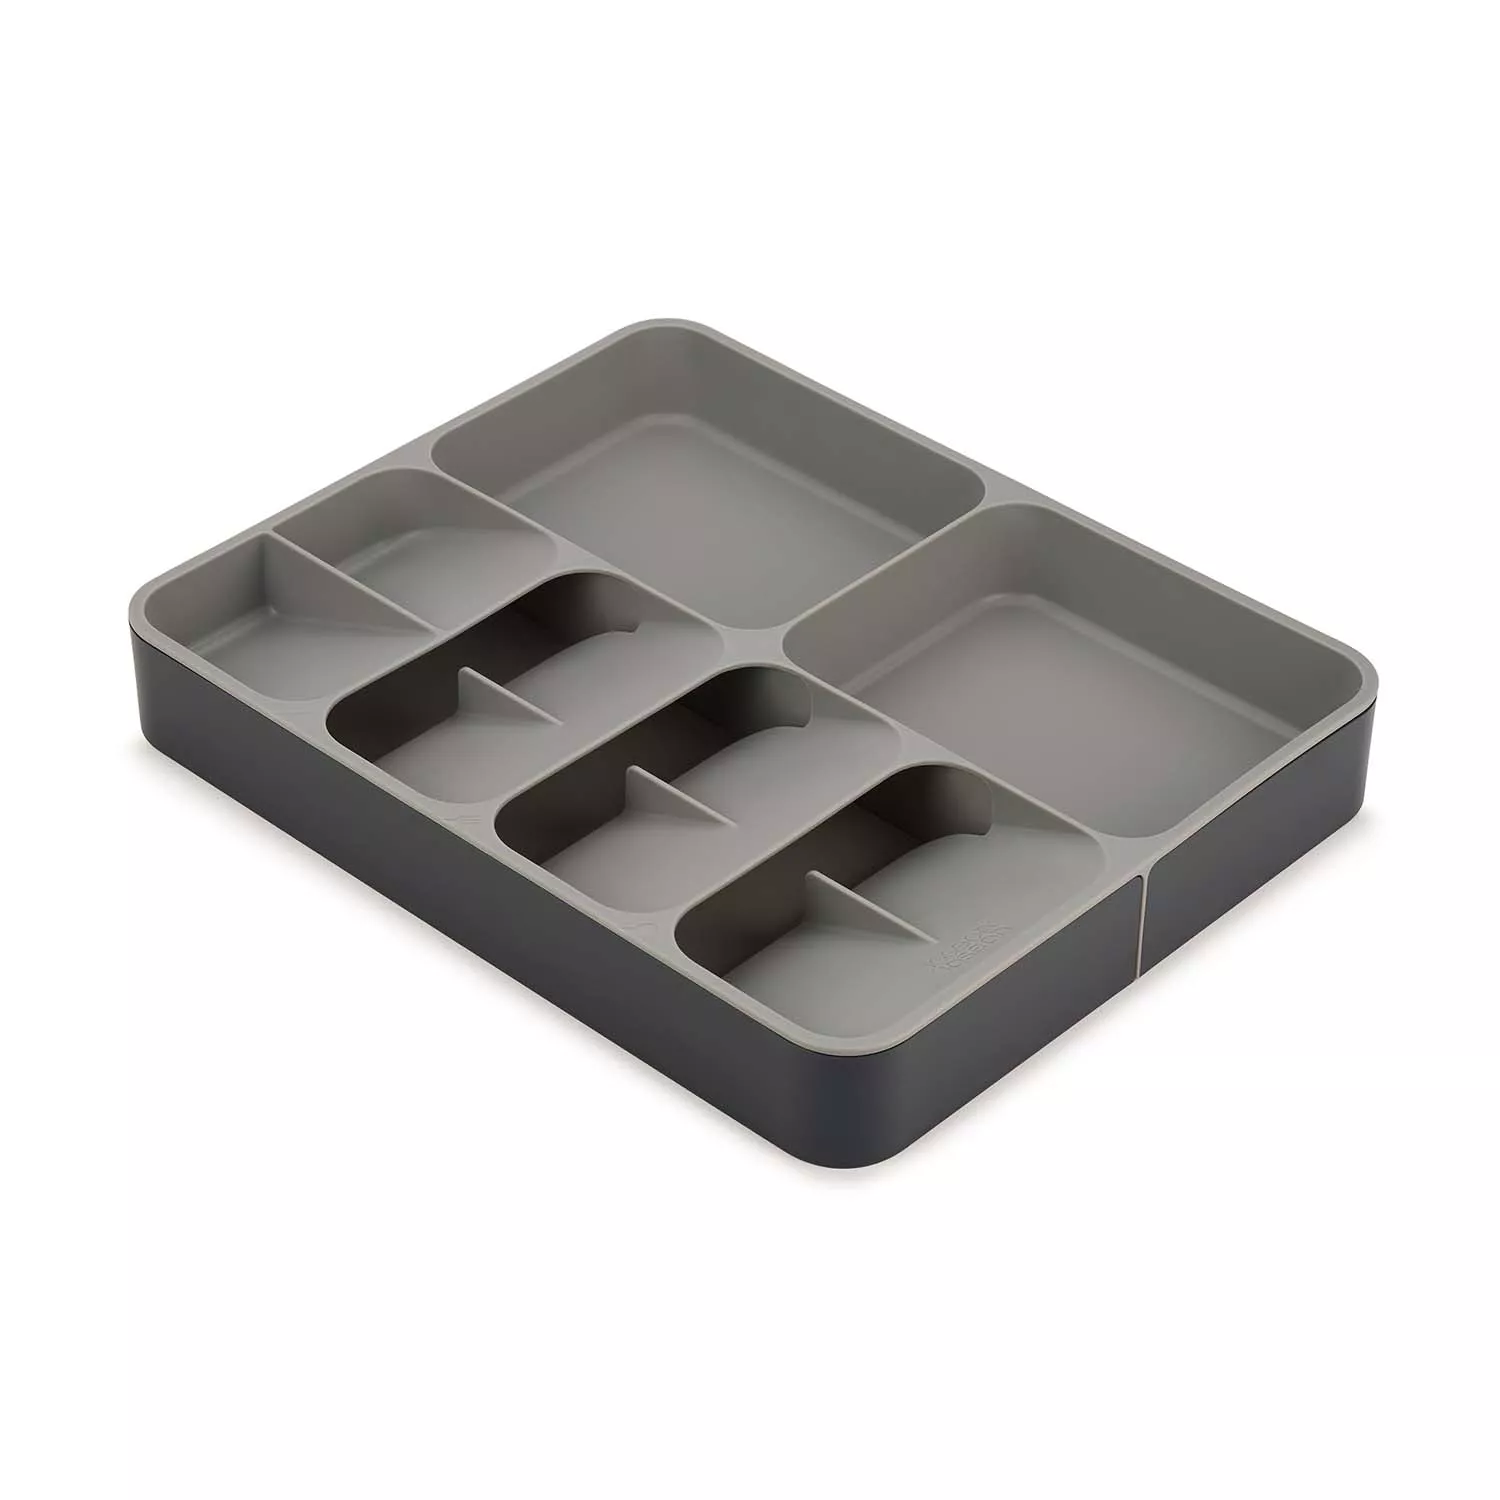 OXO GG Expandable Kitchen Tool Drawer Organizer Review 2022